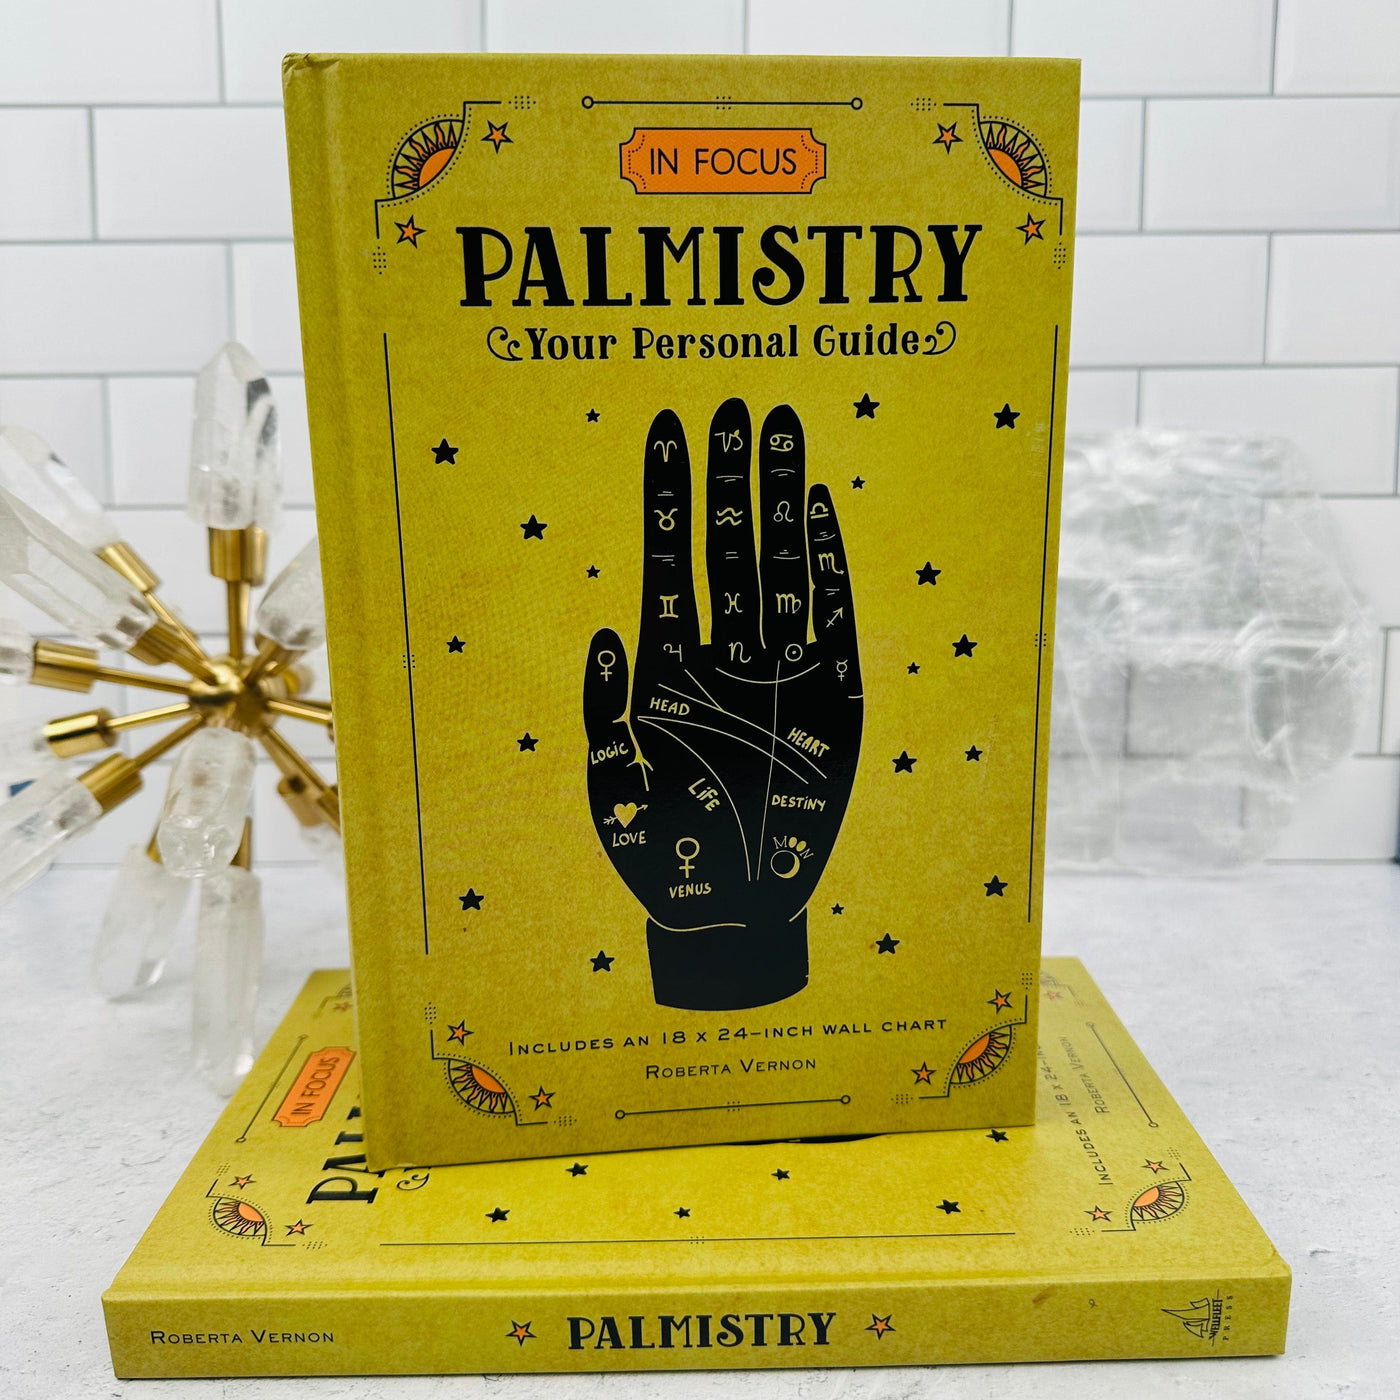  In Focus - Palmistry Your Personal Guide - front view of book